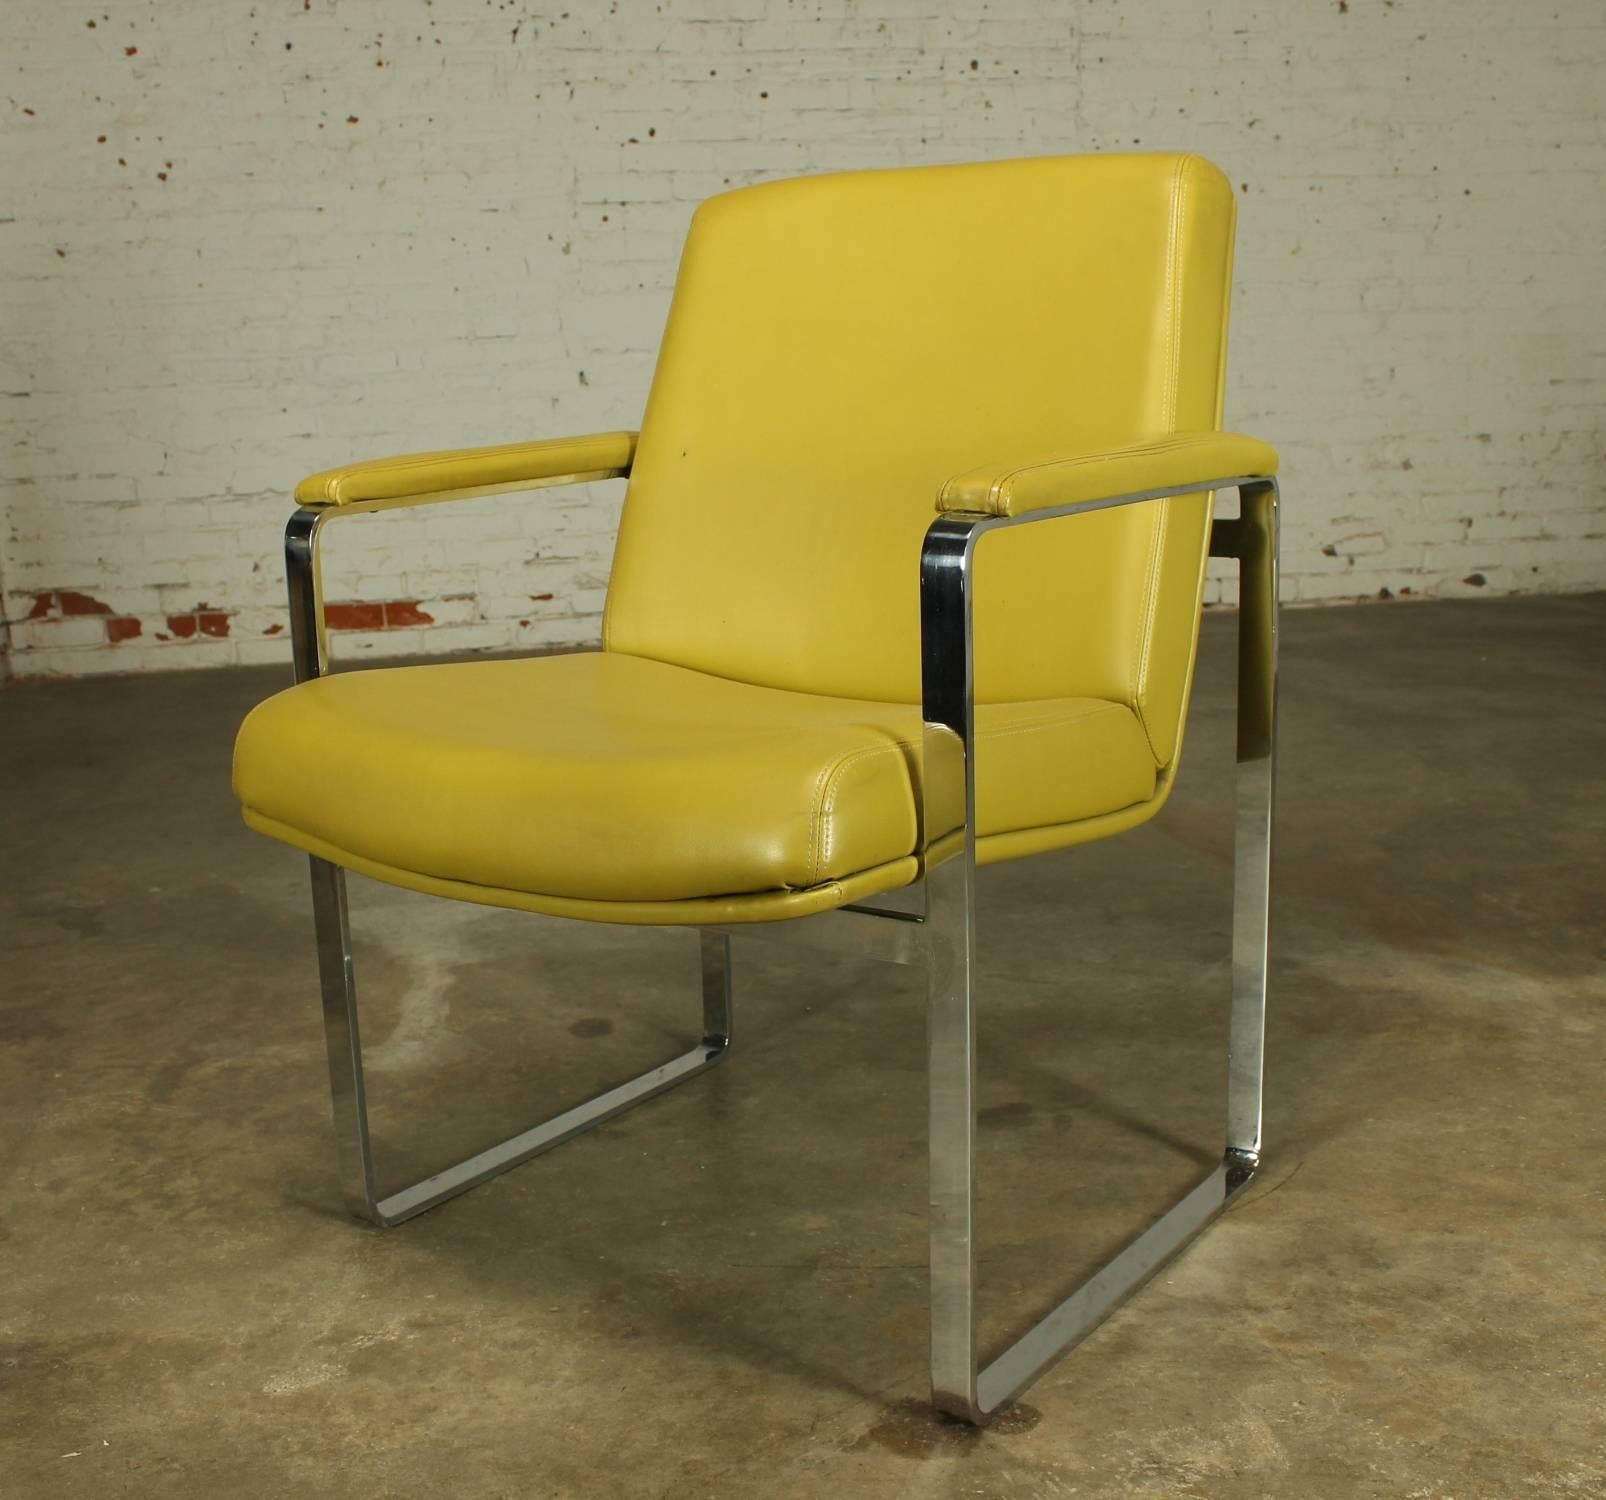 Wonderful Chromcraft-style Mid-Century Modern flat-bar chromed steel chair in gold vinyl. The chrome is in fabulous condition and the vinyl upholstery is in good condition, there is a small puncture on the side of the right arm cover. Please see